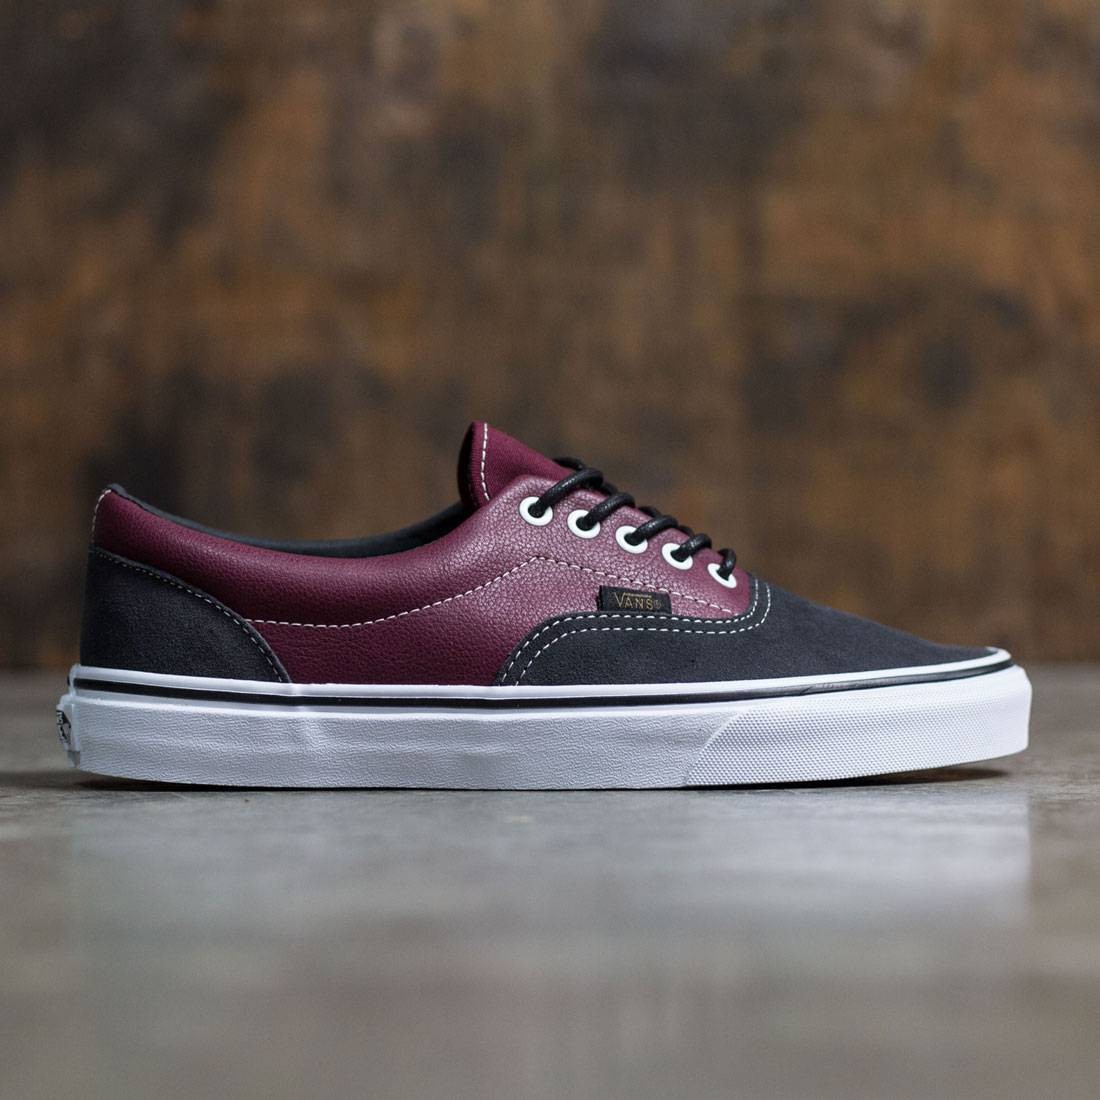 Vans - Suede And Leather burgundy port